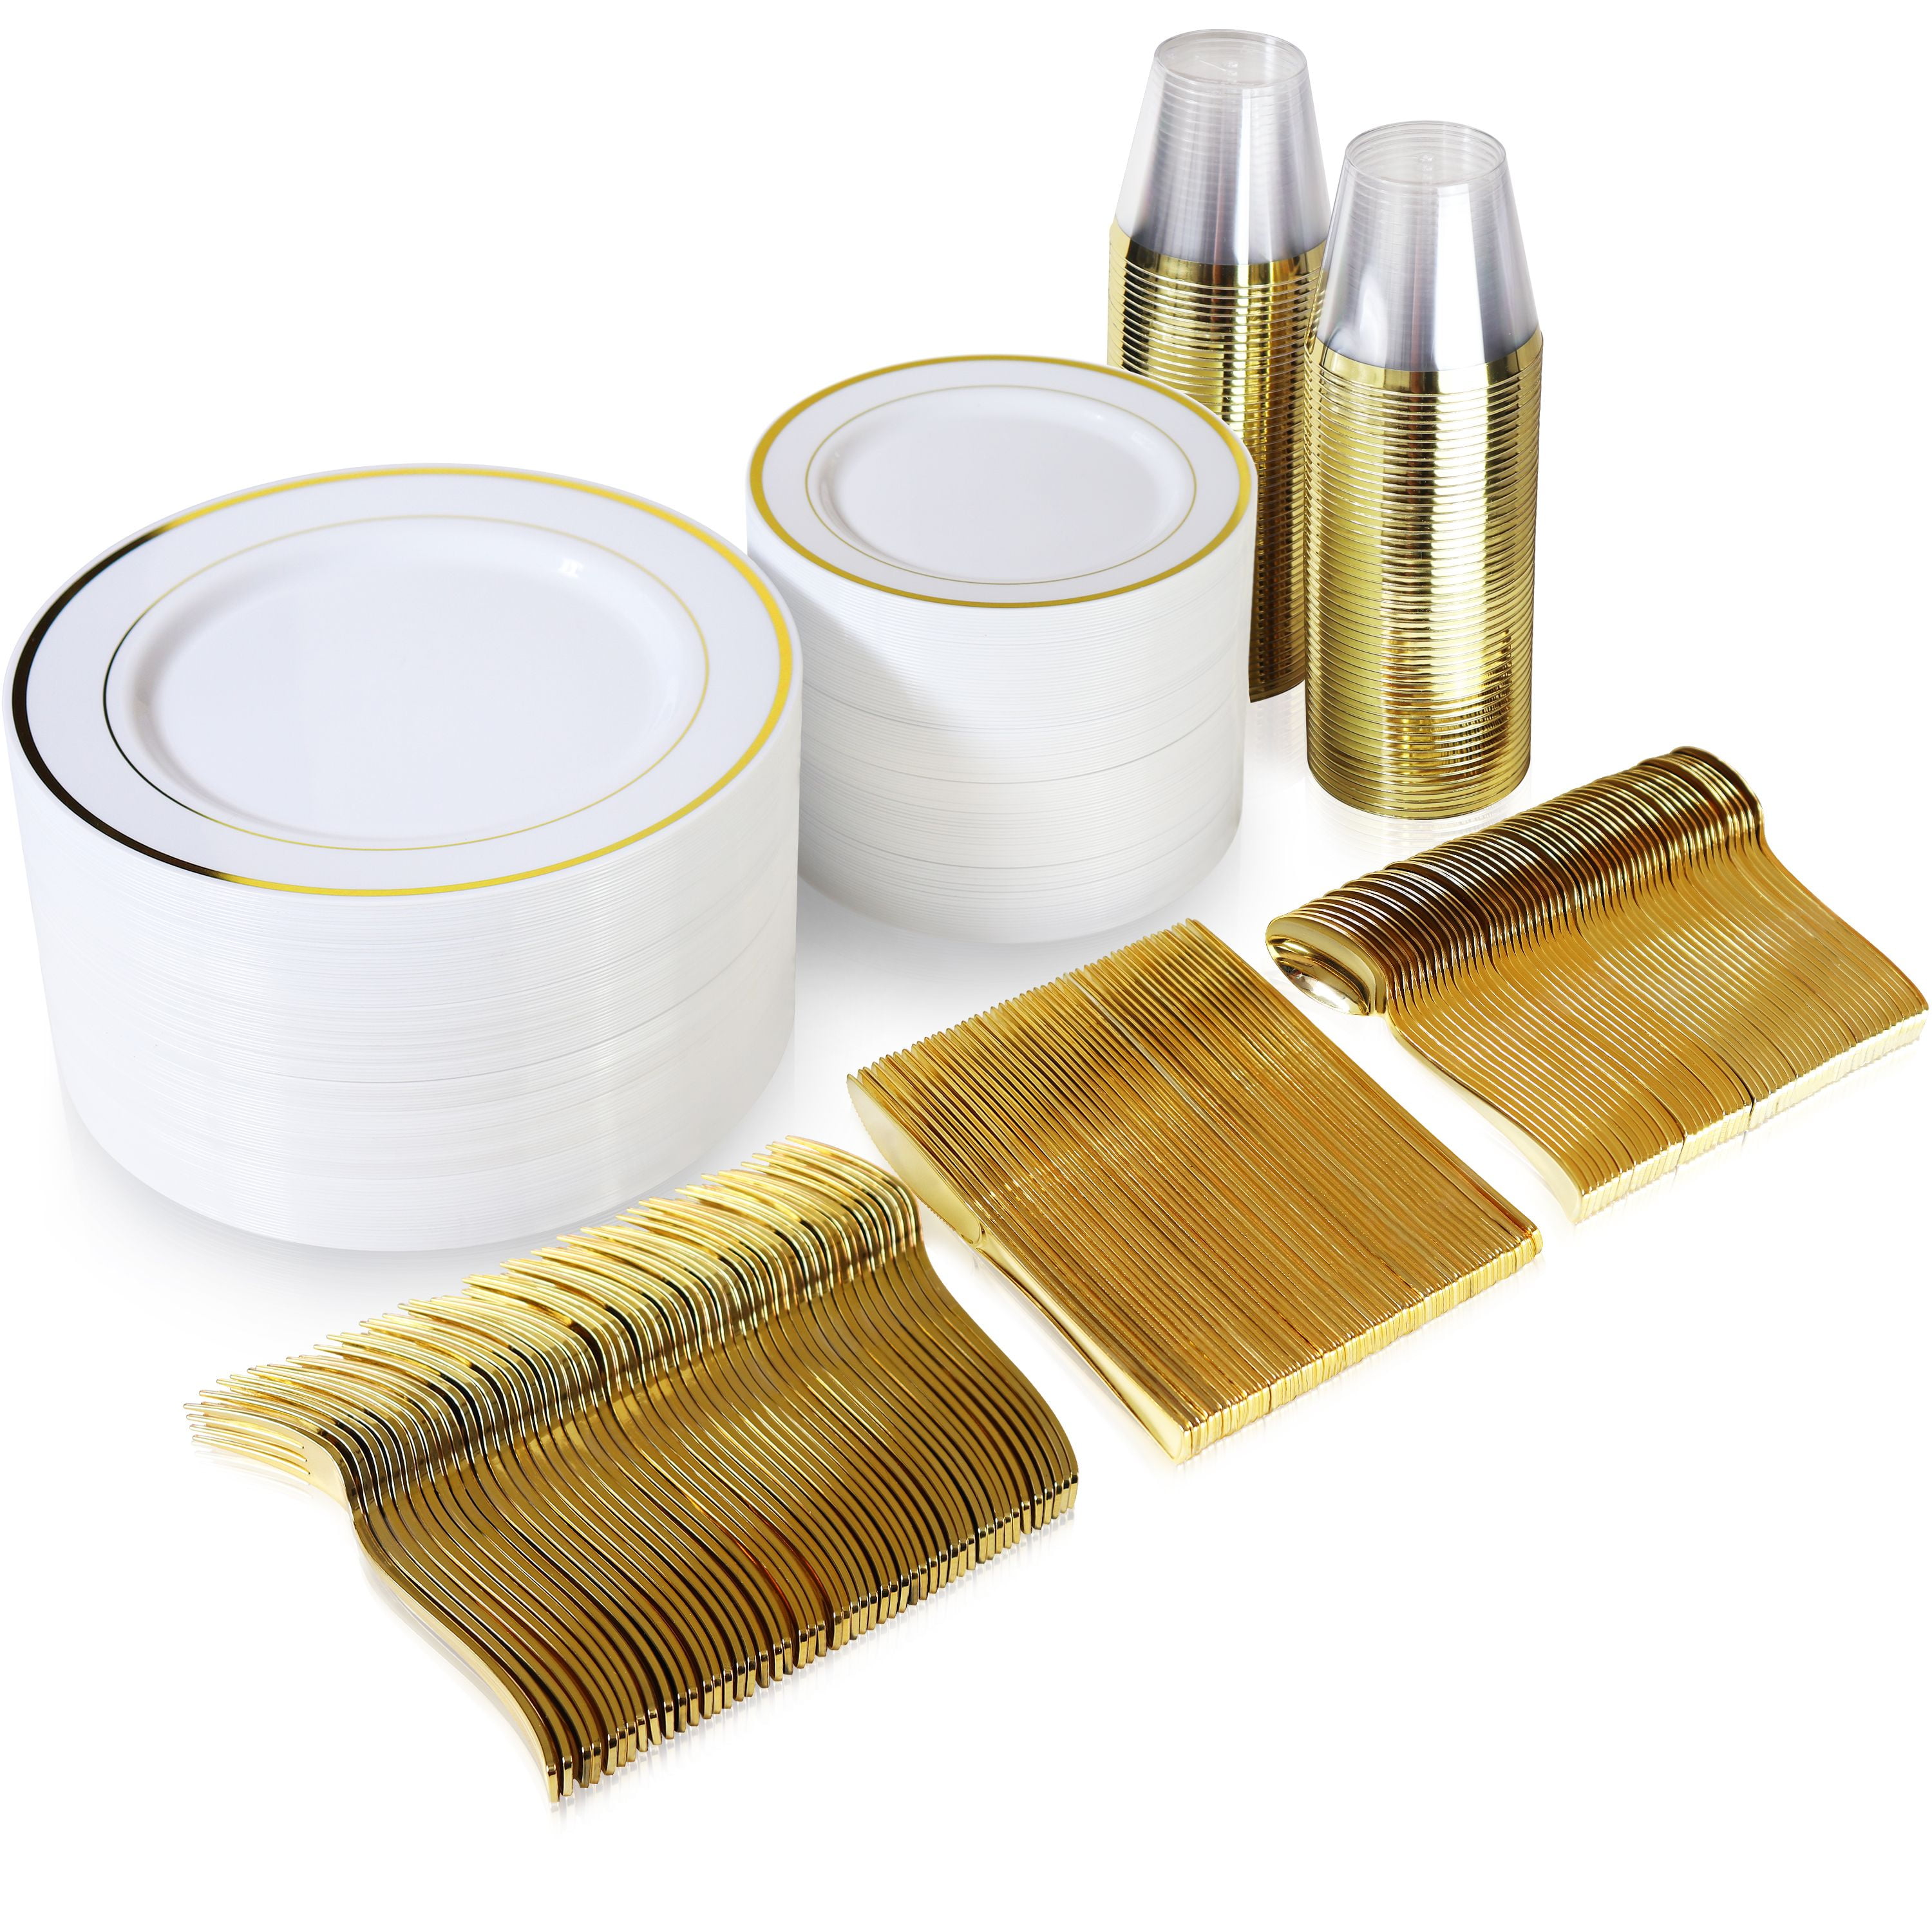 Gold Plastic Dinnerware Set 600 Pieces Up to 100 Guests Cups & Cutlery Plates 